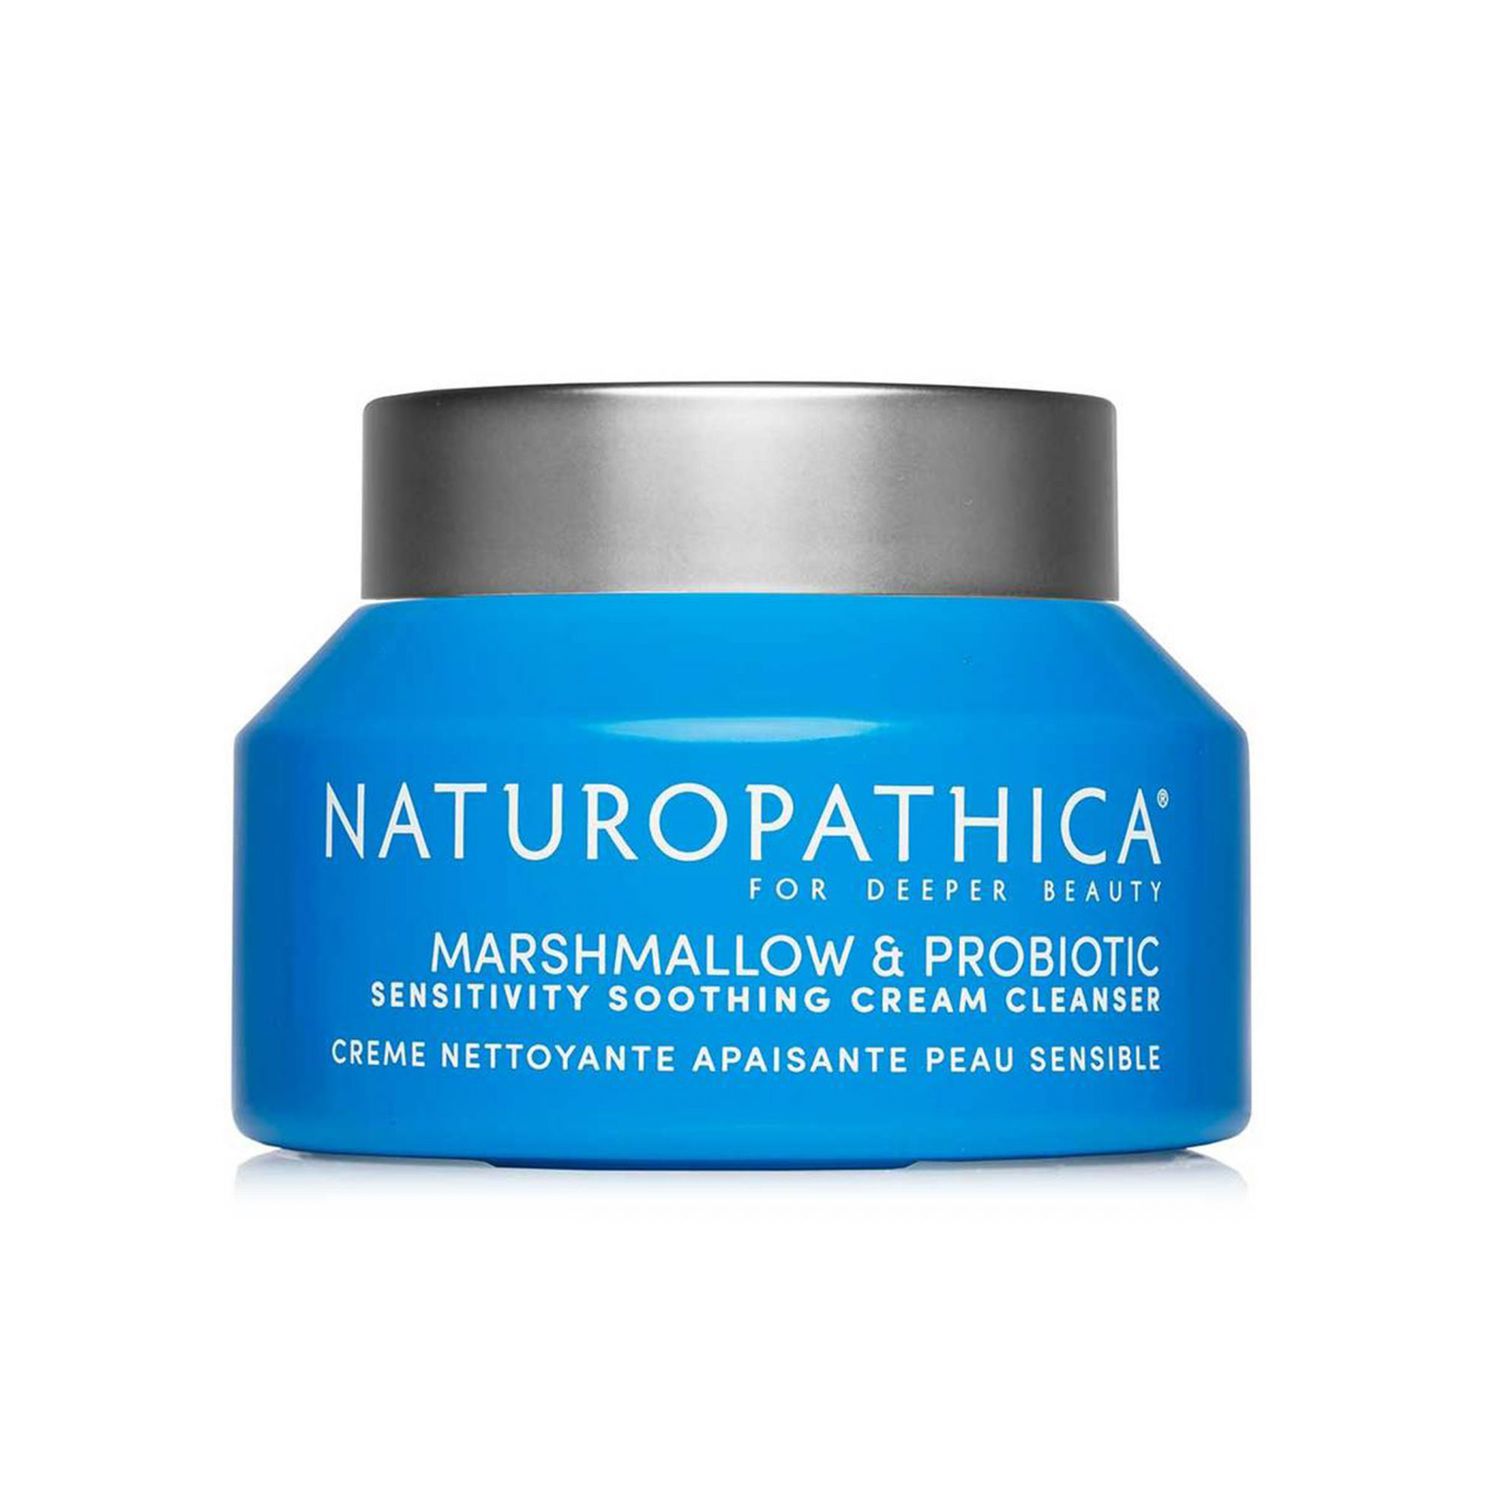 Beauty-Awards-Skin-Naturopathica-Marshmallow-Probiotic-Sensitivity-Soothing-Cream-Cleanser